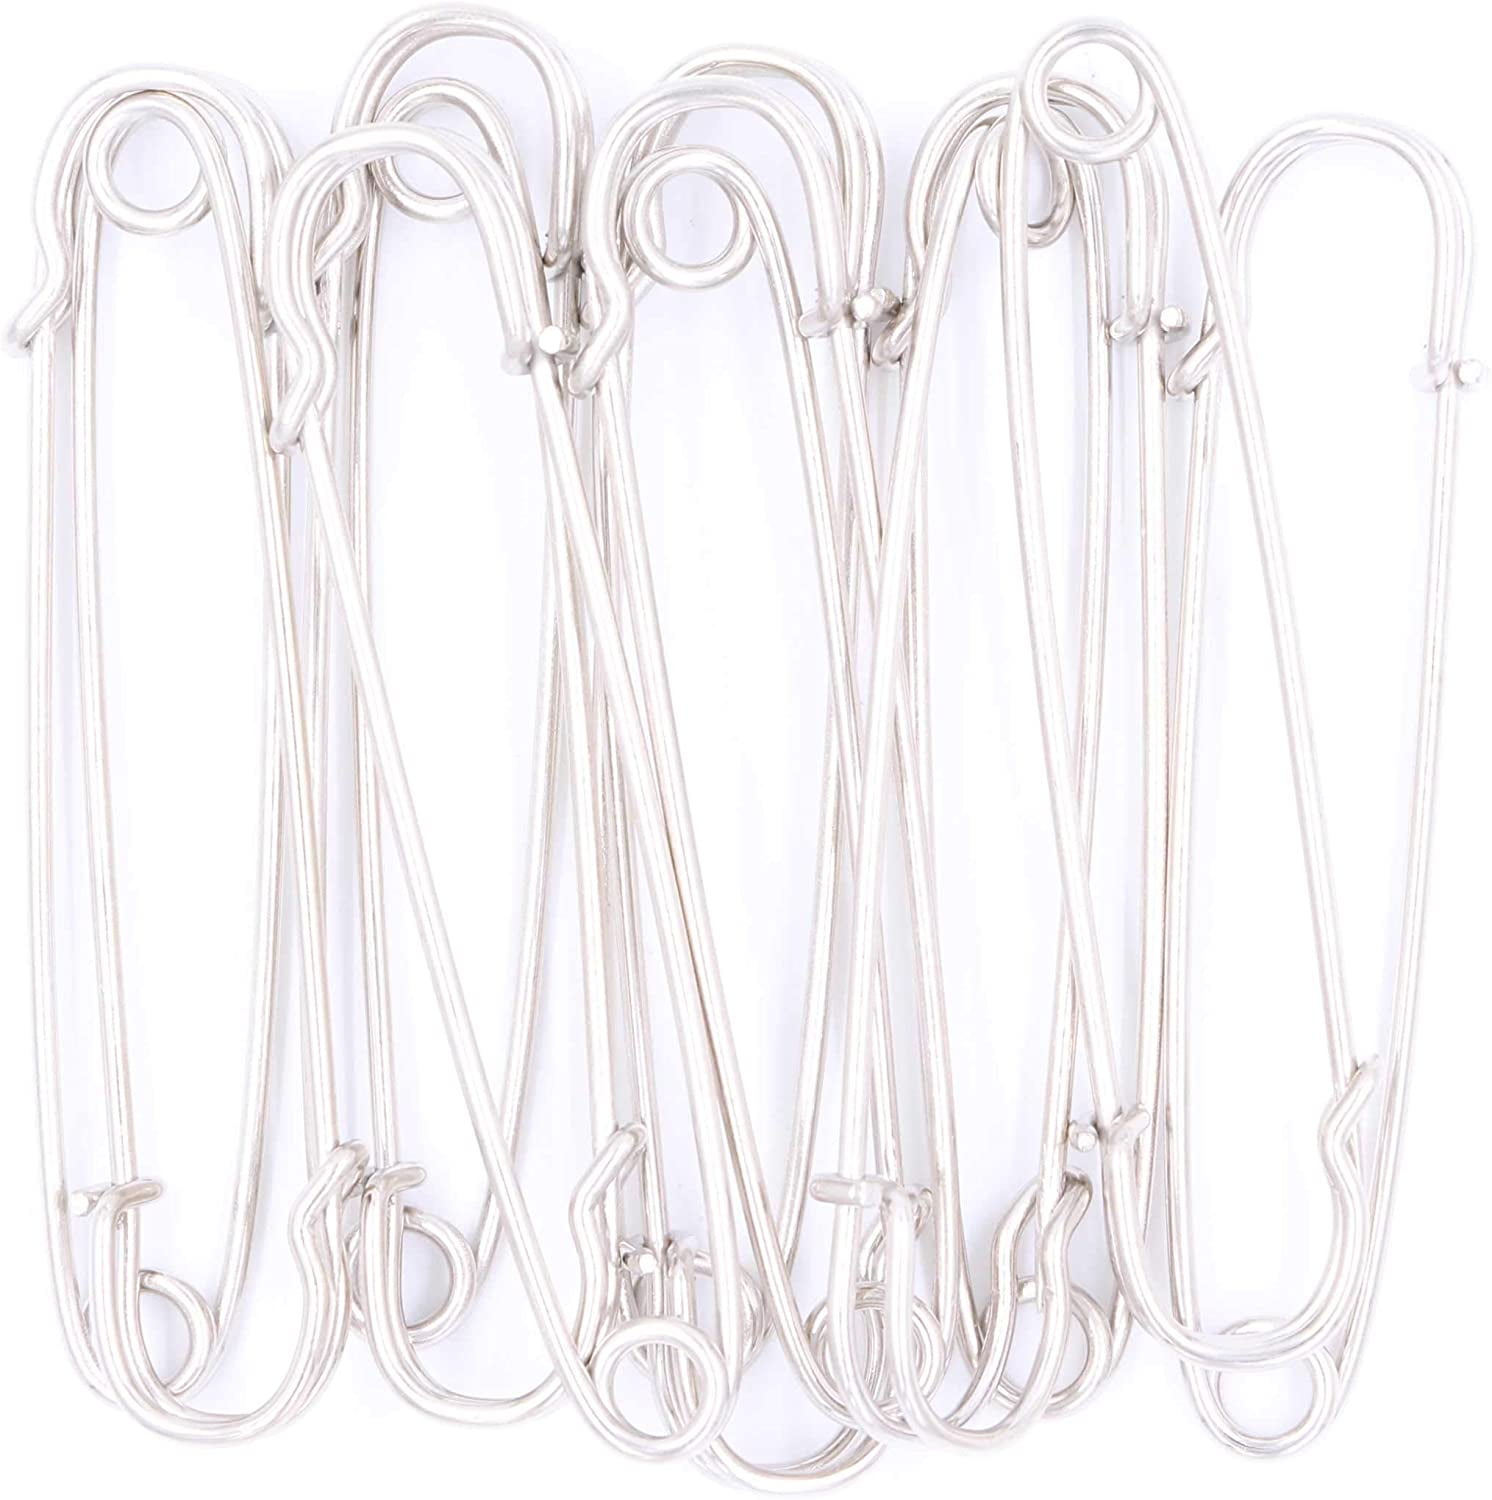  Safety Pins Heavy Duty Safety Pins Beautiful and